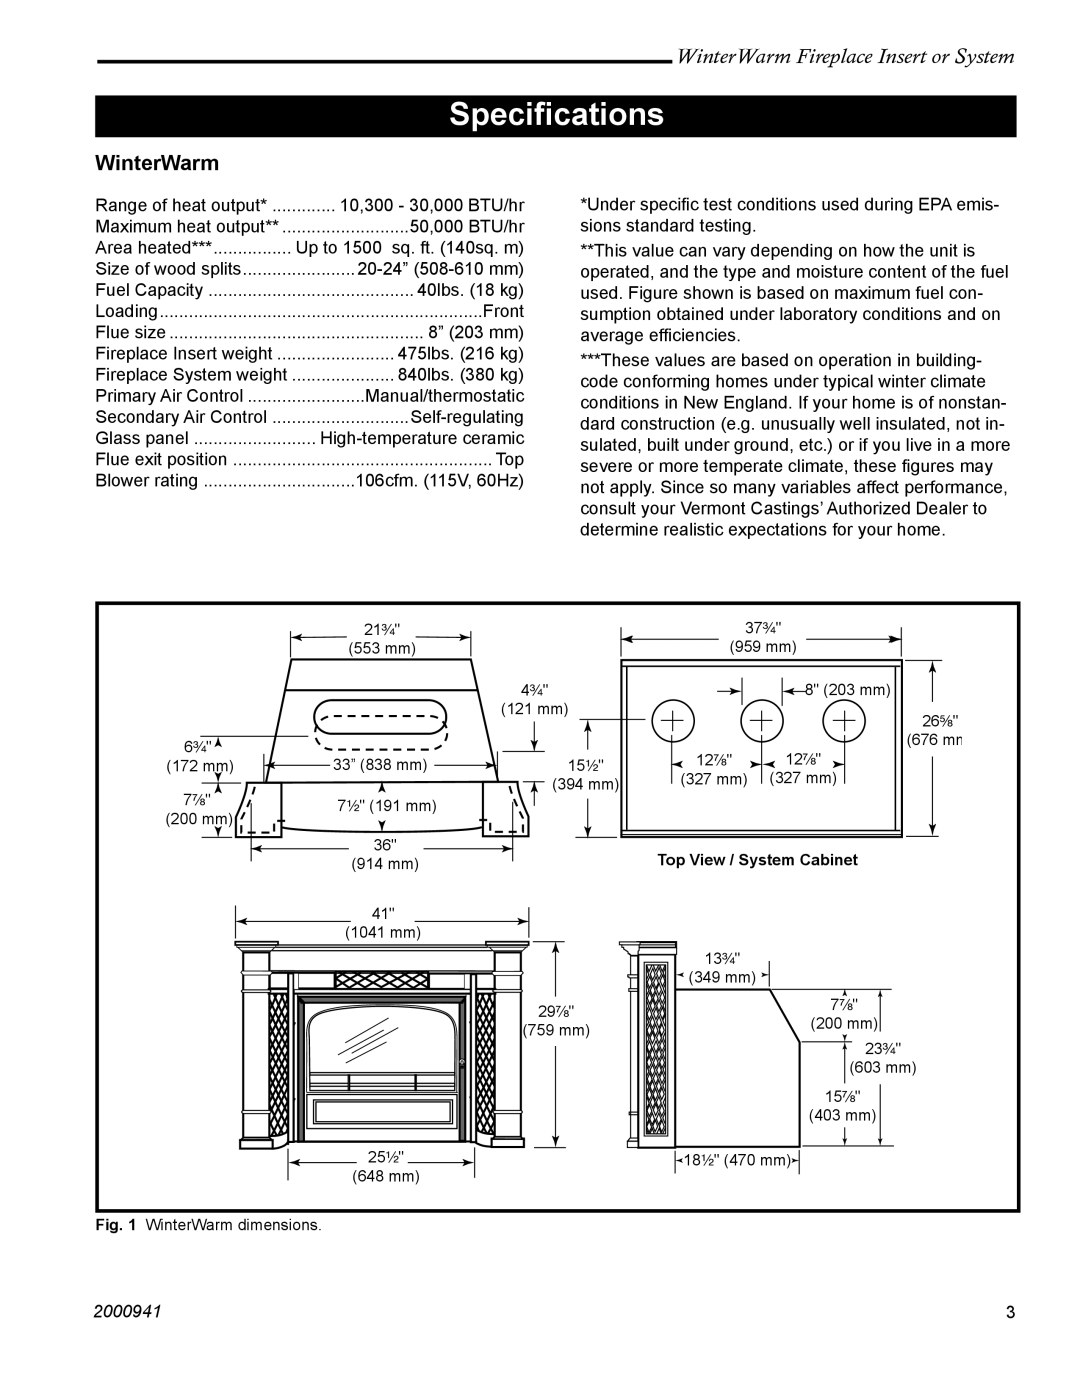 Vermont Casting 2100 installation instructions Speciﬁcations, WinterWarm Fireplace Insert or System, 2000941 